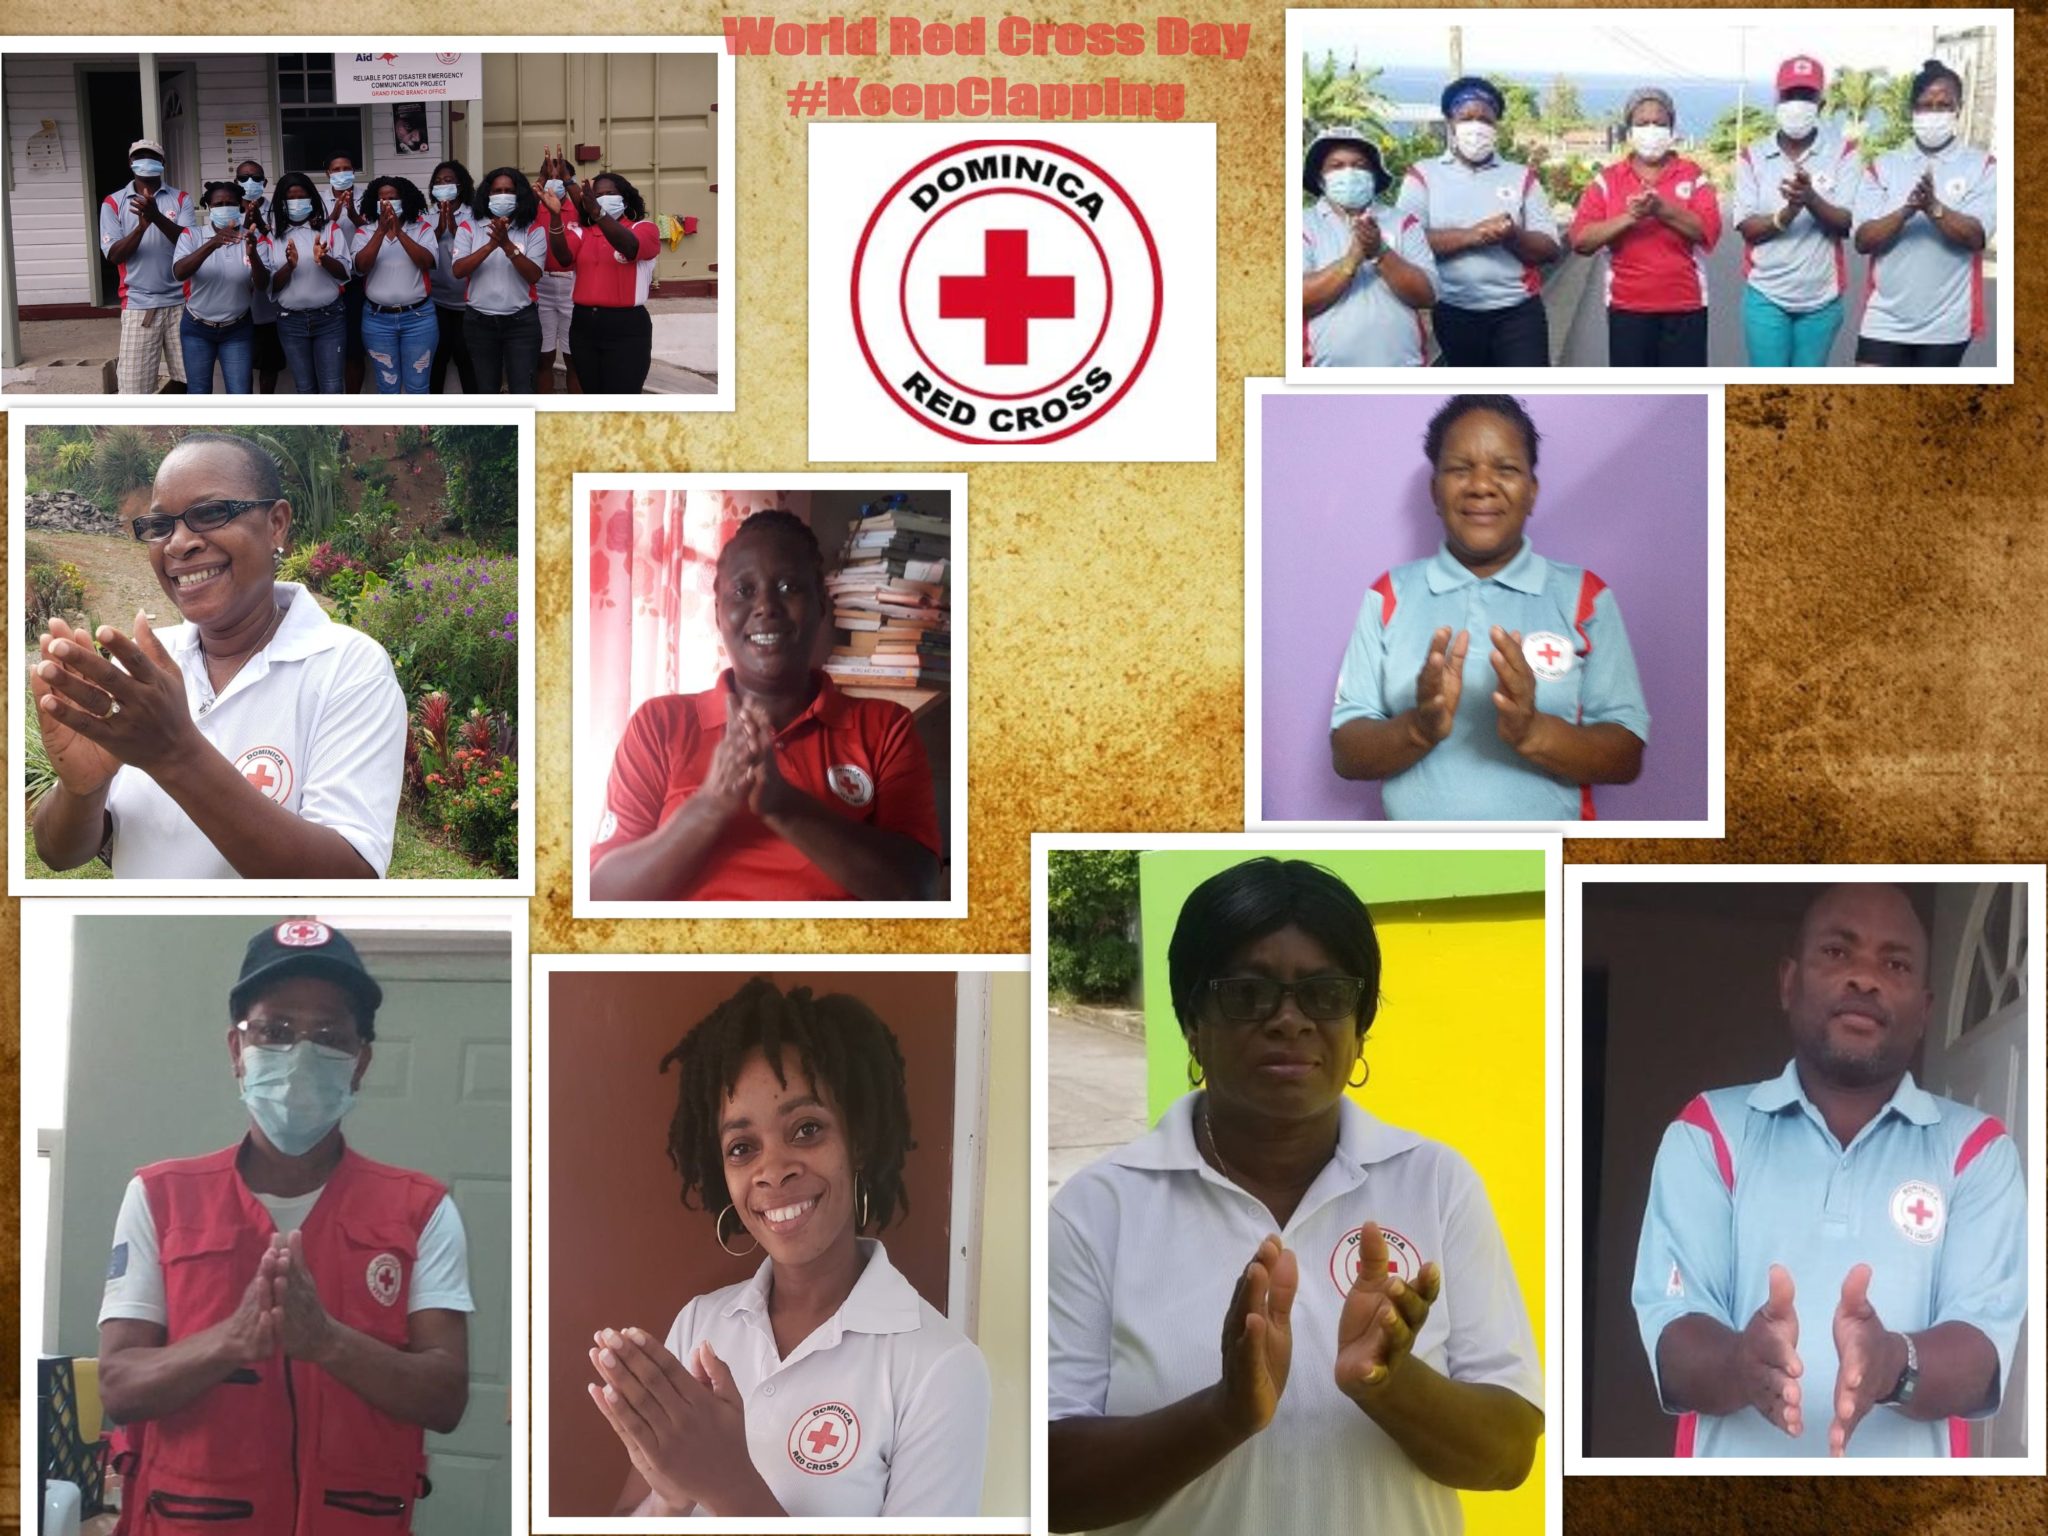 World Red Cross and Red Crescent Day 2020: #KeepClapping for Dominica Red Cross Society volunteers